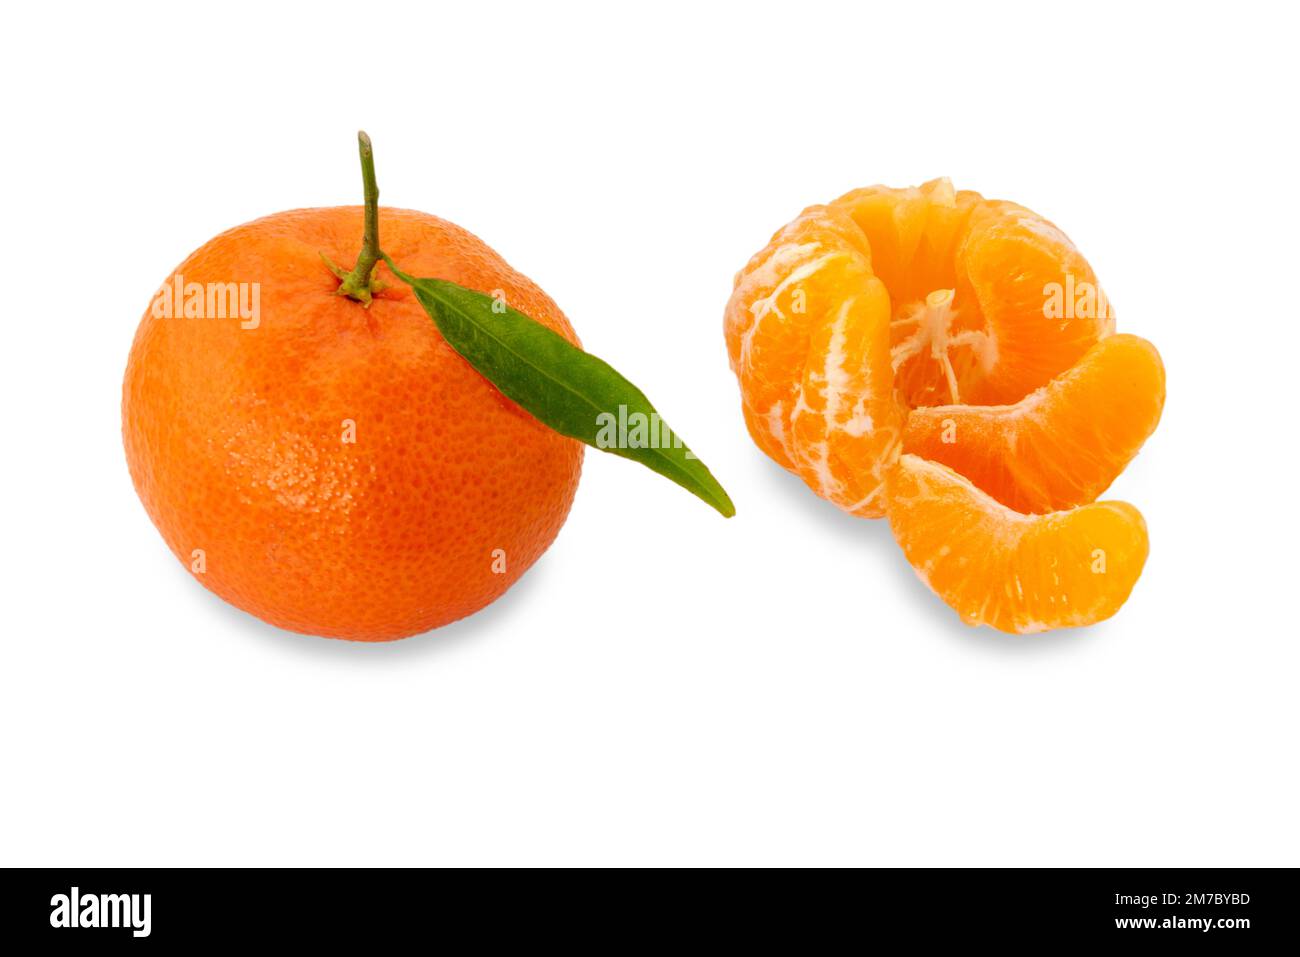 https://c8.alamy.com/comp/2M7BYBD/ripe-tangerine-with-green-leaf-next-to-peeled-tangerine-with-mandarin-wedges-isolated-on-white-with-clipping-path-2M7BYBD.jpg